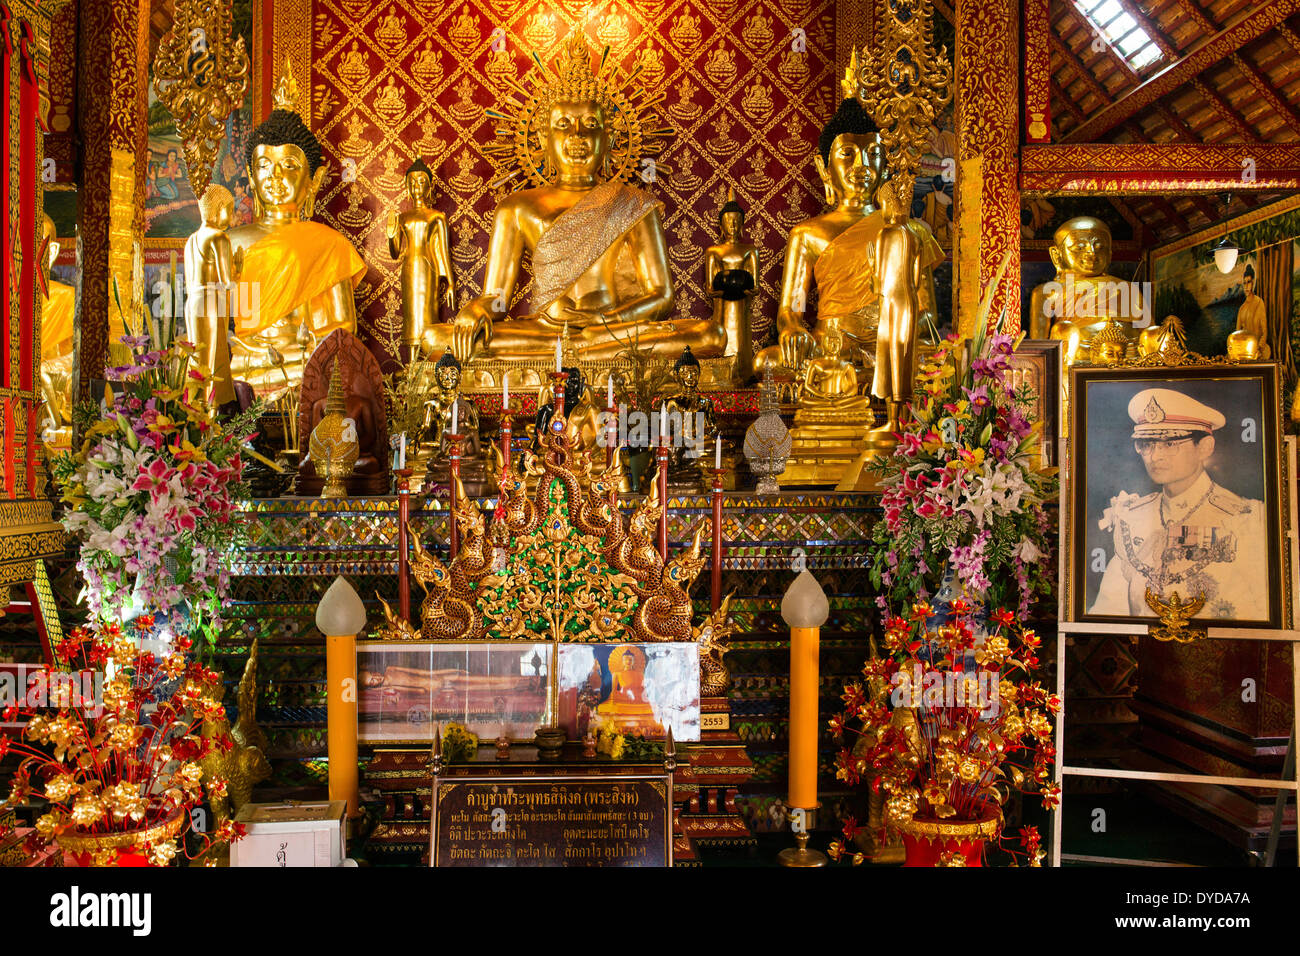 Golden Buddha statues and a picture of King Bhumibol Adulyadej in Wat Phrah Singh Temple, Chiang Rai, Chiang Rai province Stock Photo